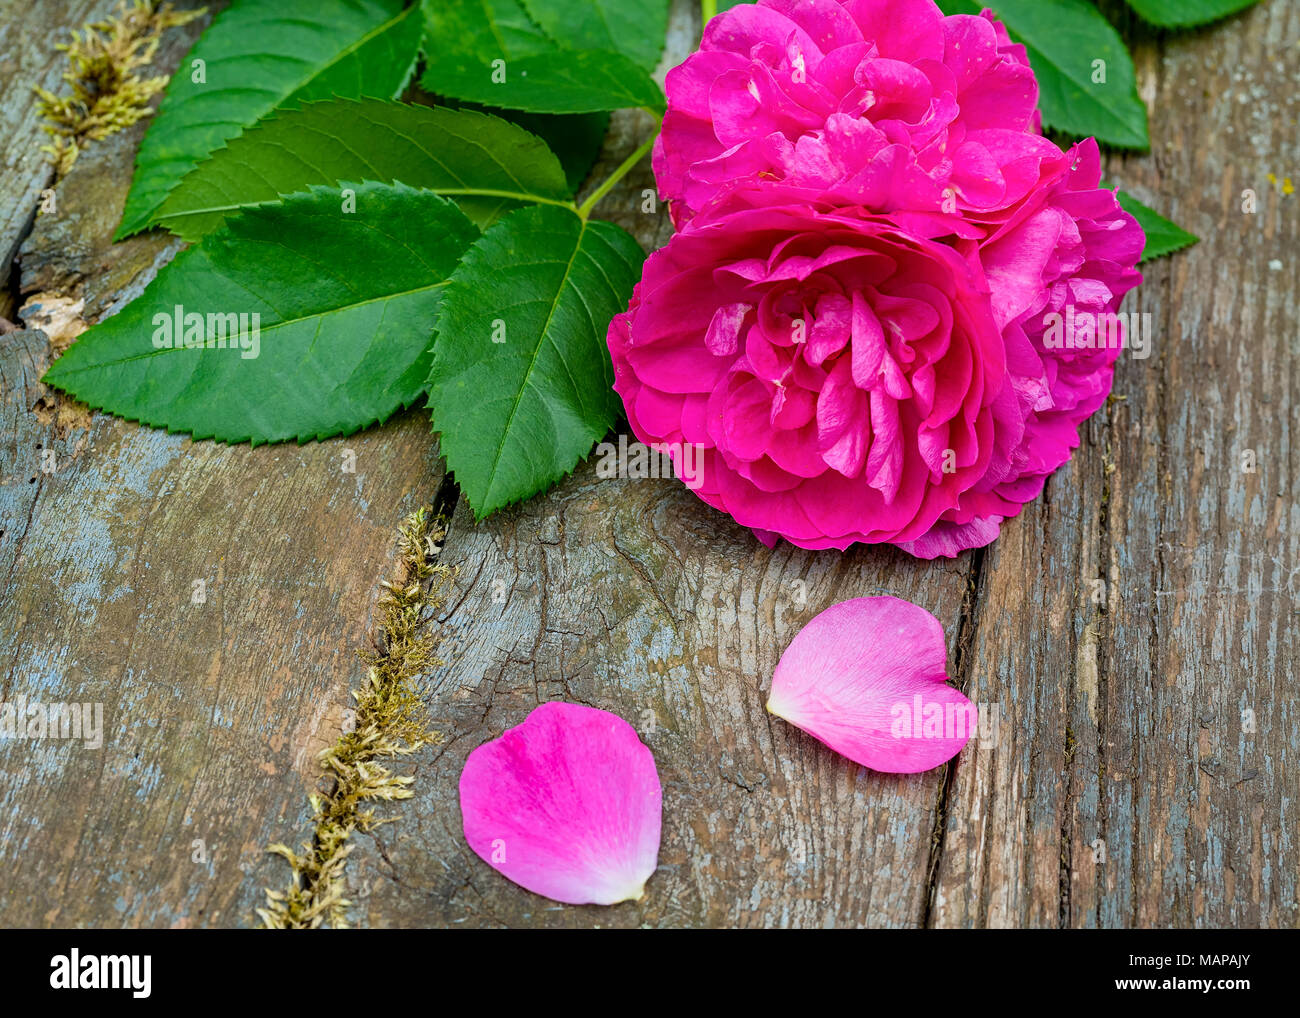 John Cabot rose and petals on an old wooden background. Stock Photo